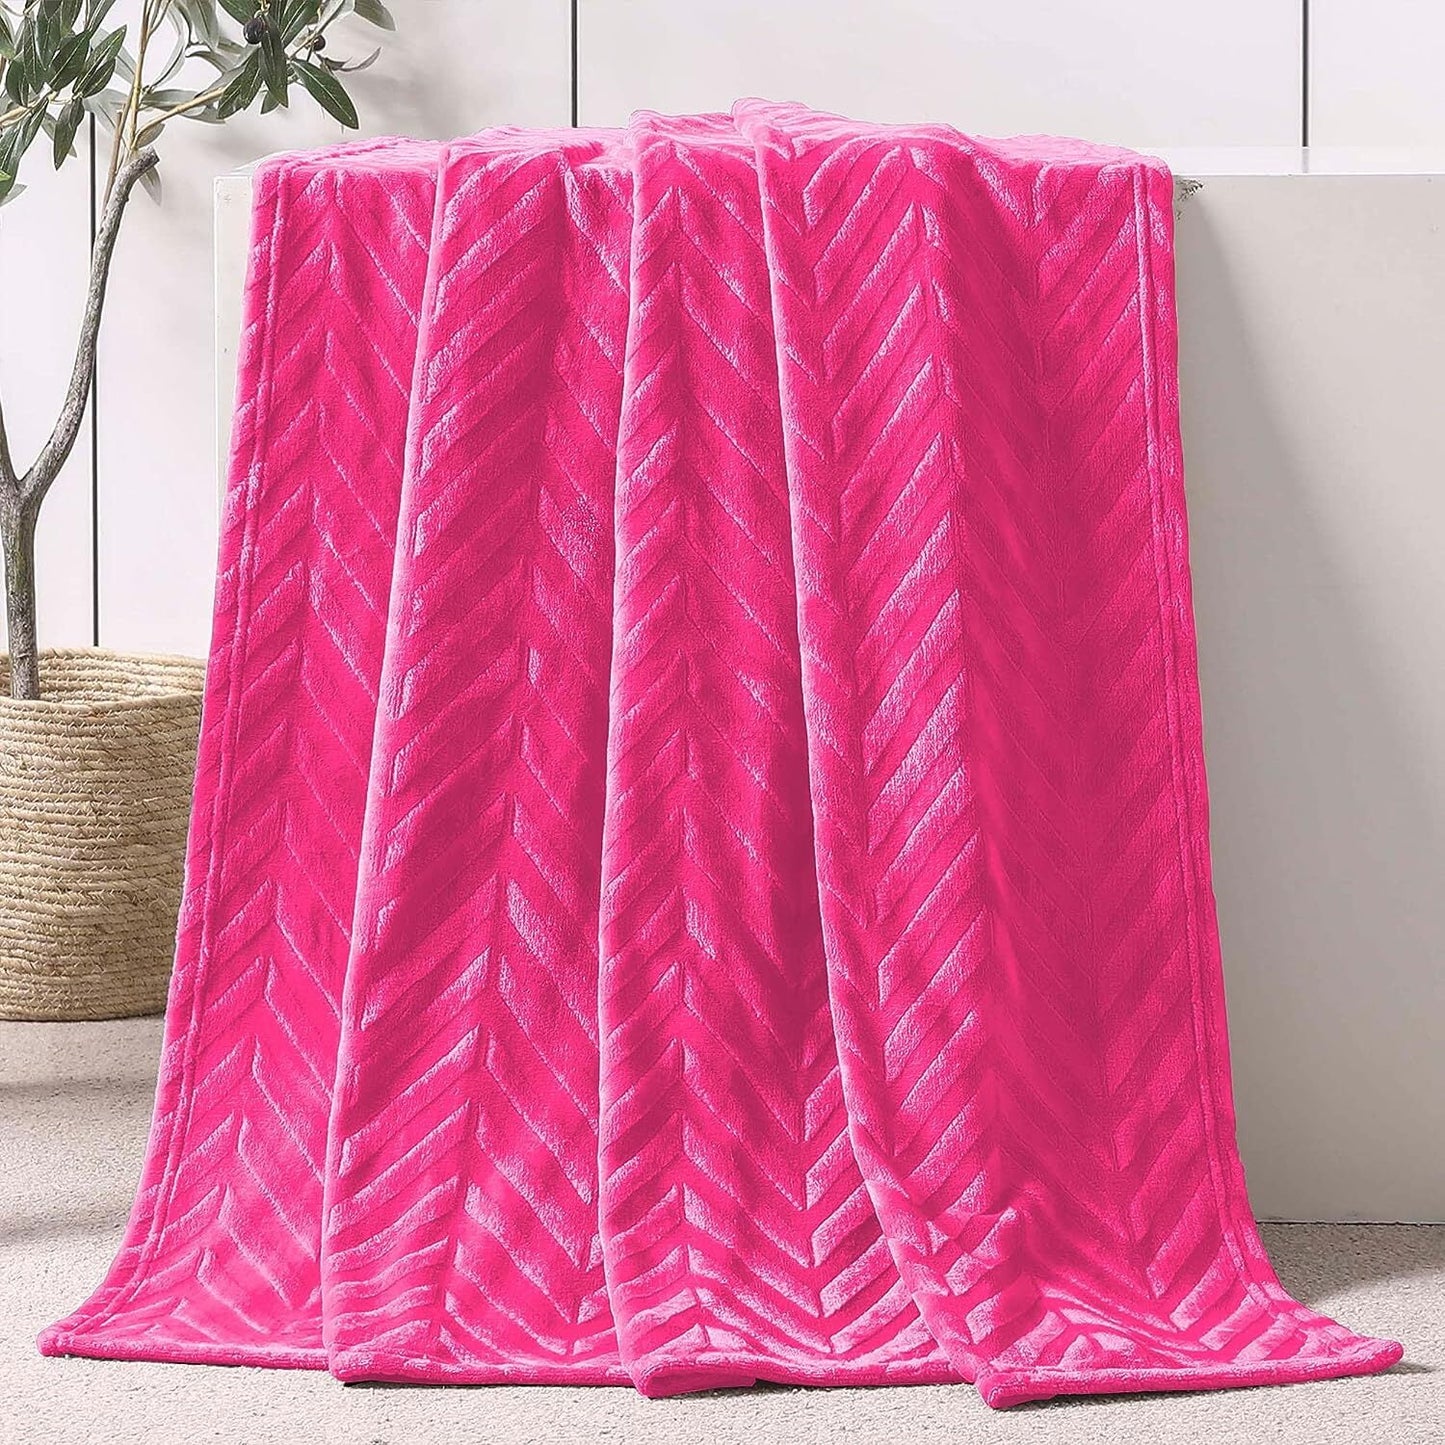 Whale Flotilla Fleece Throw Blanket for Couch, Soft Fluffy Sofa Bed Blanket with Chevron Pattern for All Season, Warm and Lightweight, 50x60 Inch, Hot Pink